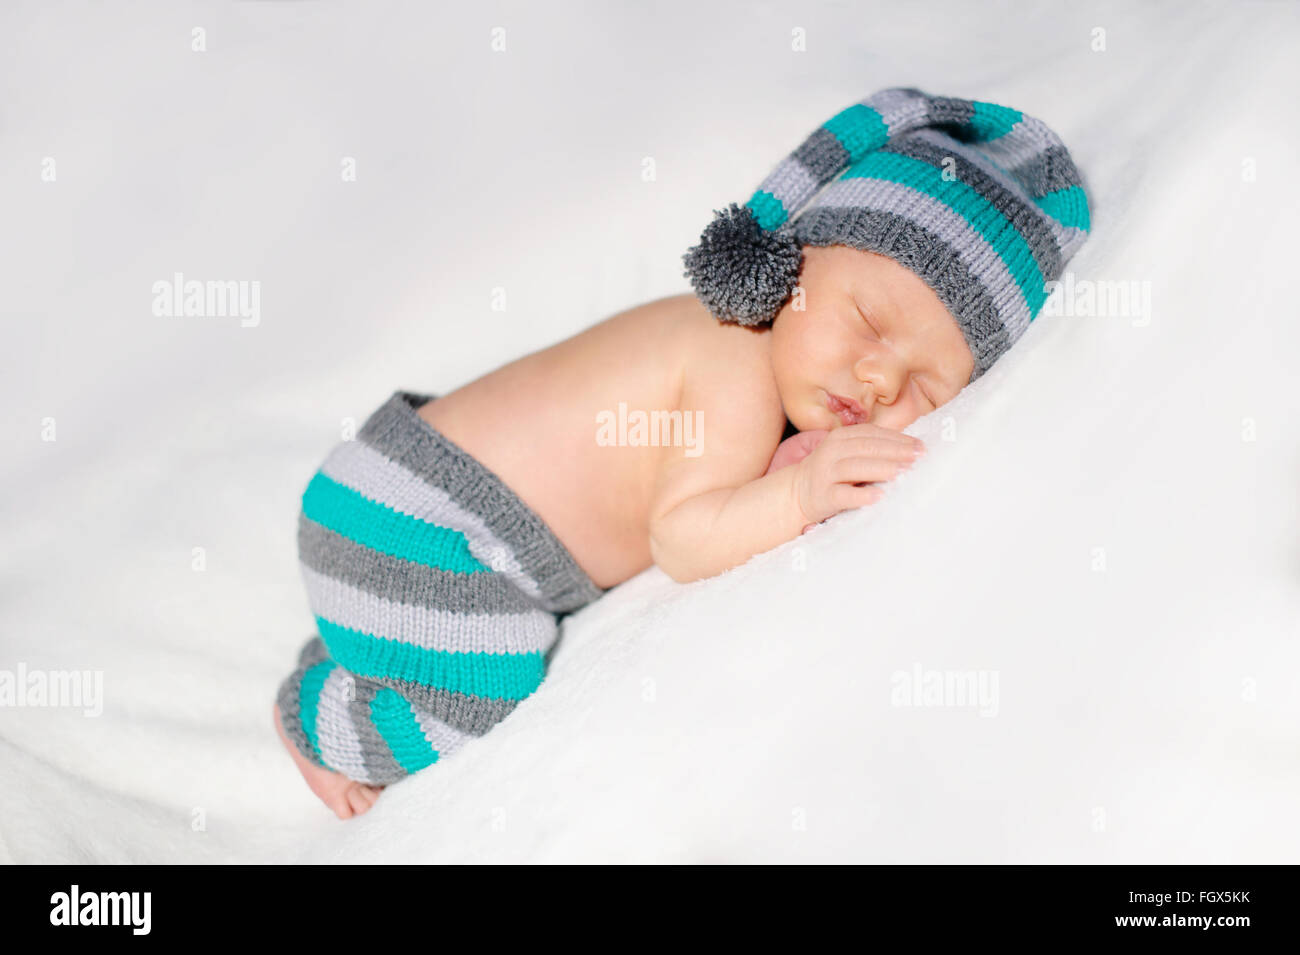 newborn baby sleeps in a knit suit on a white background Stock Photo